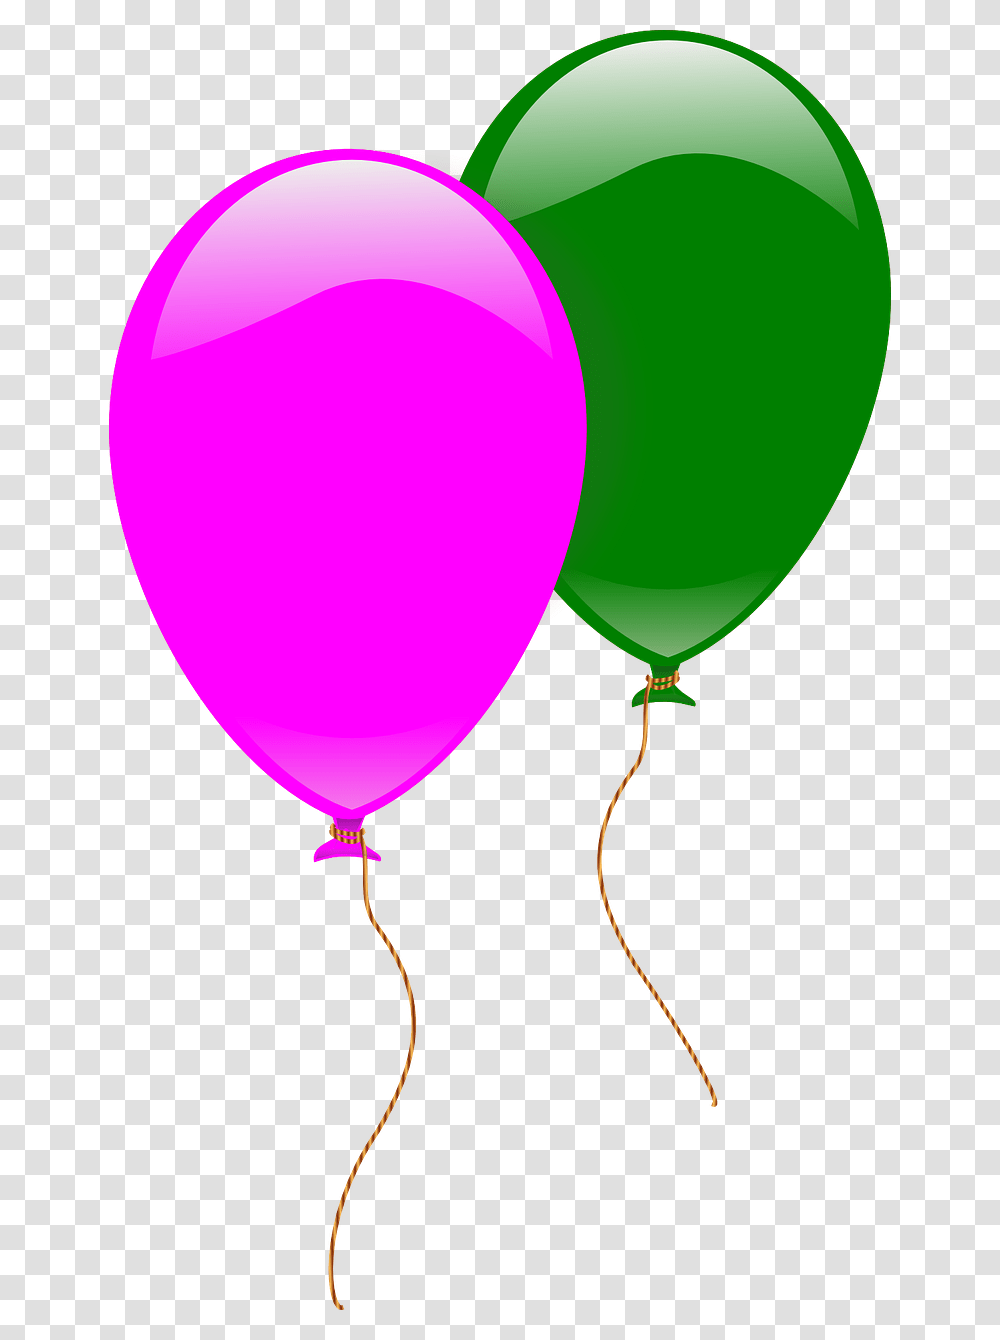 Balloons Pink Green Flying Image Transparent Png